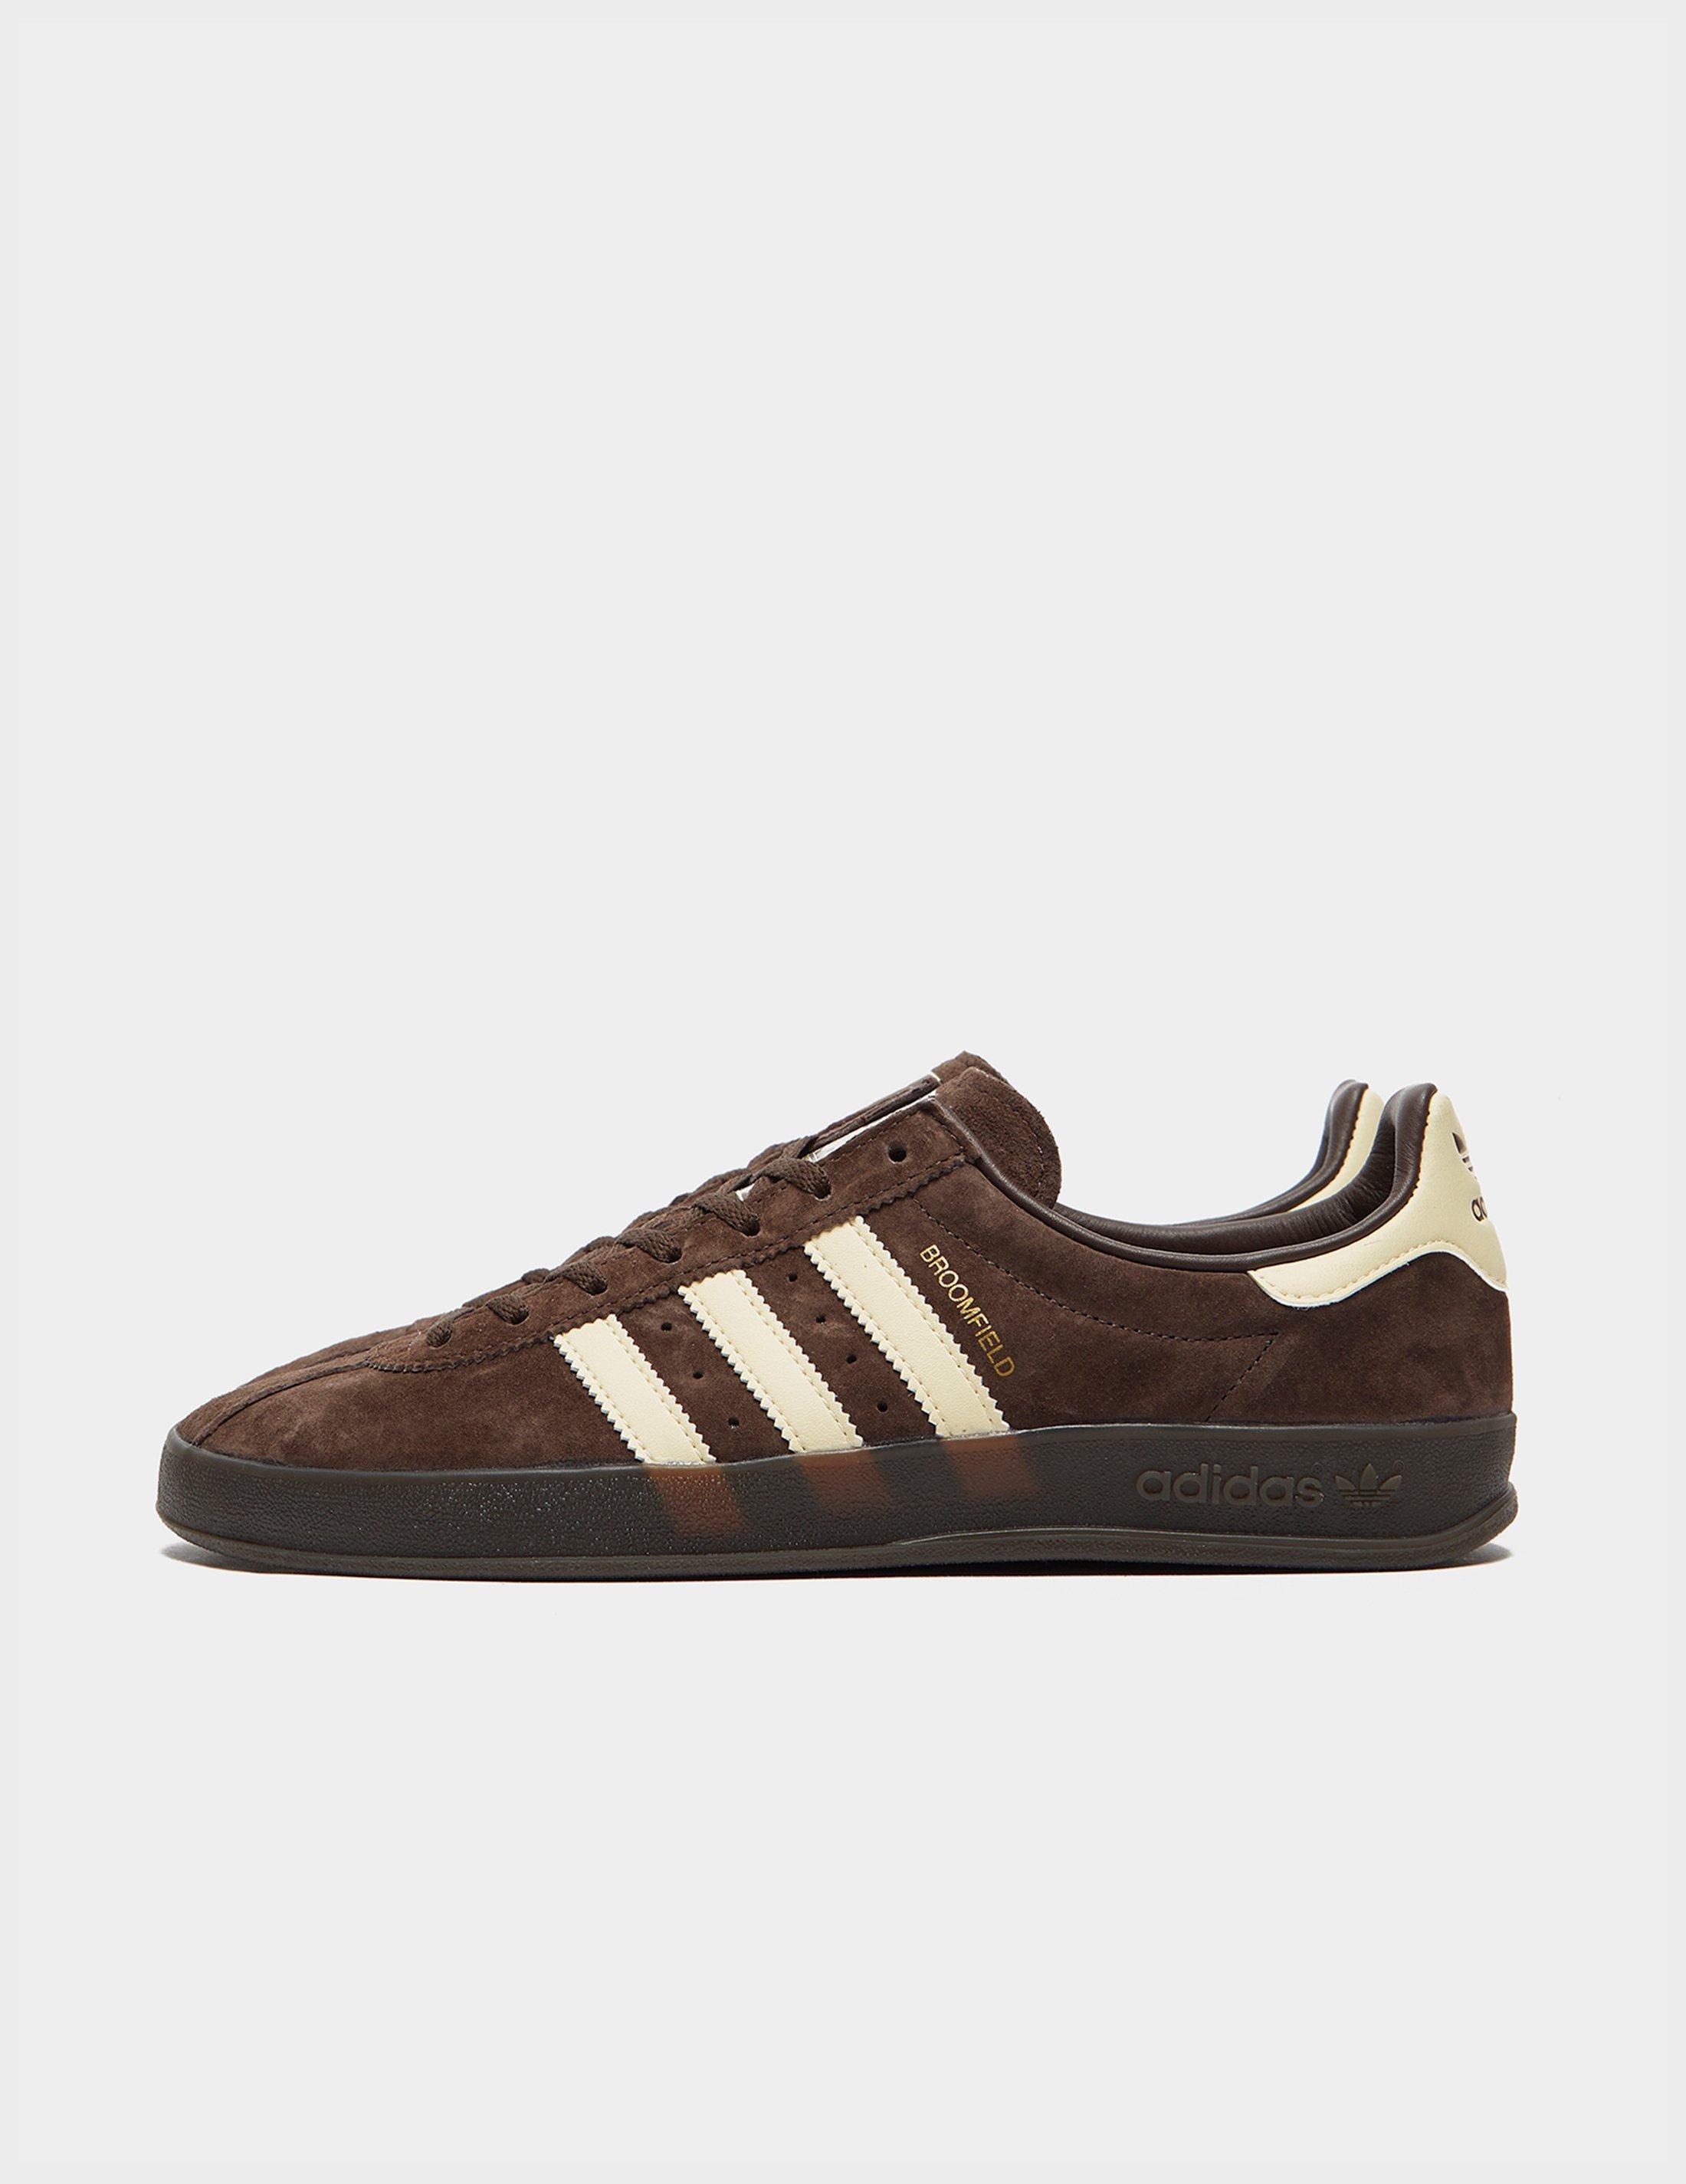 adidas Originals Suede Broomfields Brown Trainers for Men | Lyst